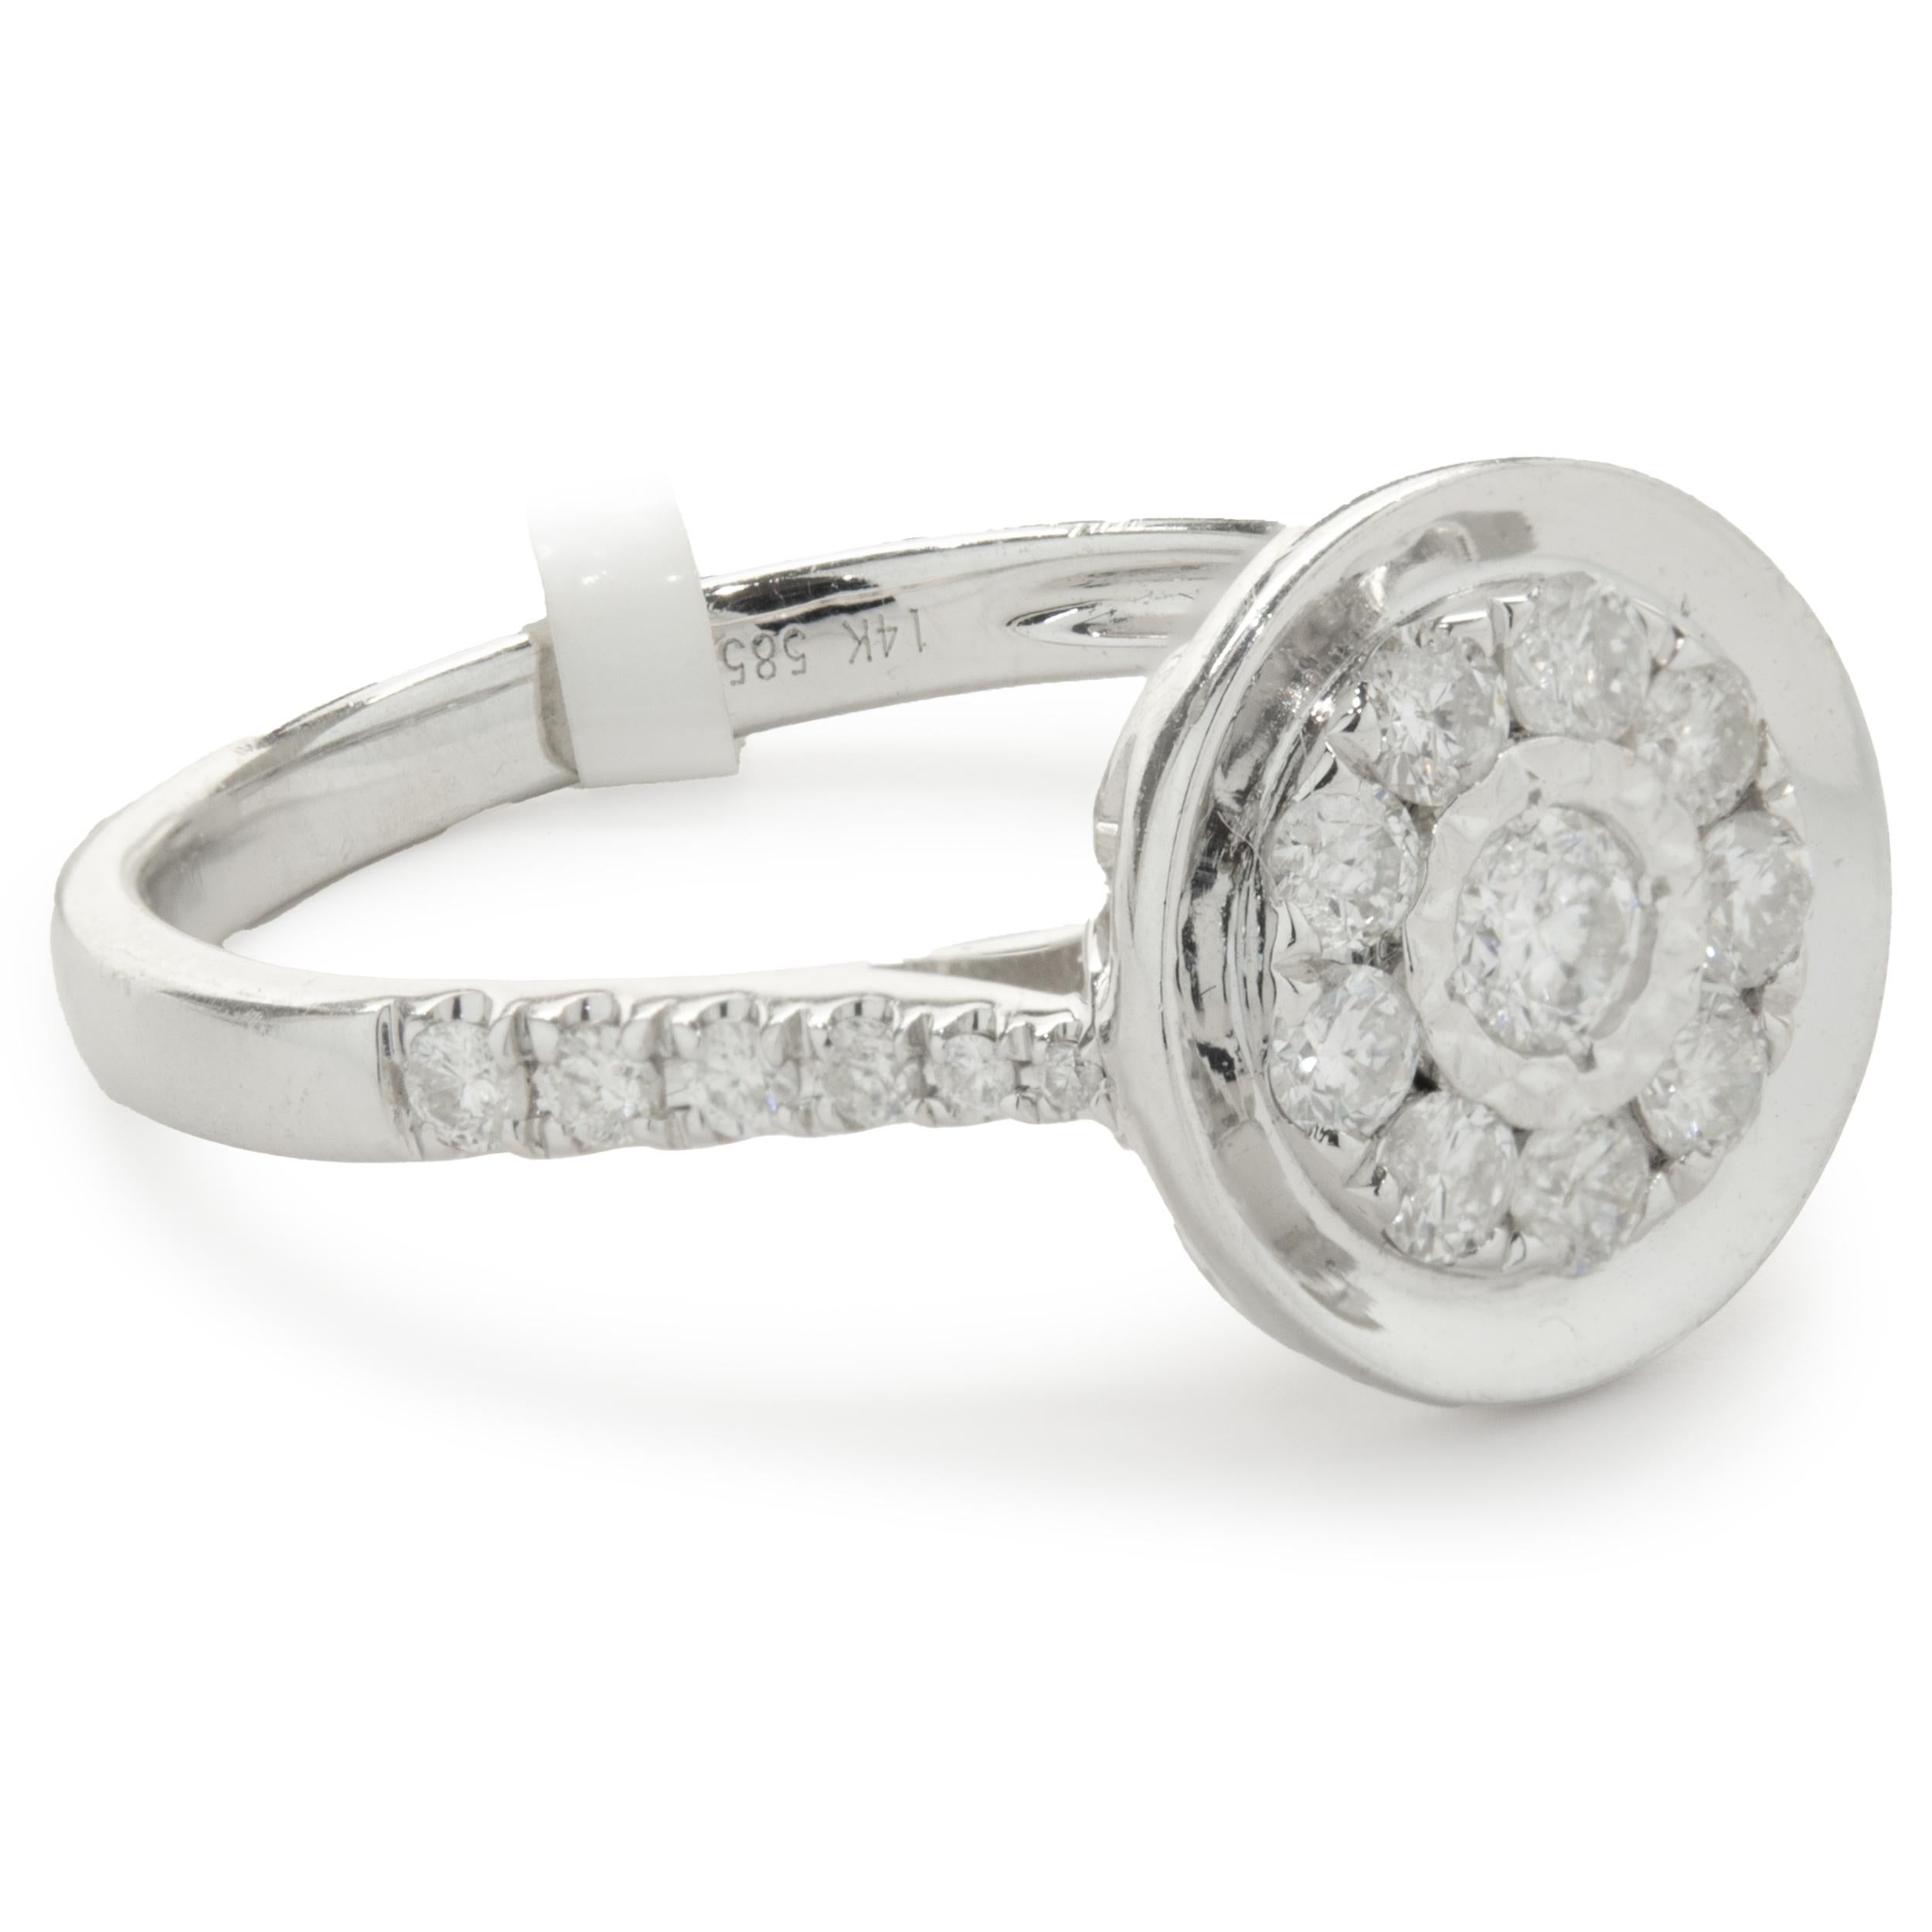 Designer: custom
Material: 14K white gold
Diamond: 17 round brilliant= 0.53cttw
Color: G
Clarity: VS
Ring size: 6.75 (please allow two additional shipping days for sizing requests)
Weight: 3.20 grams